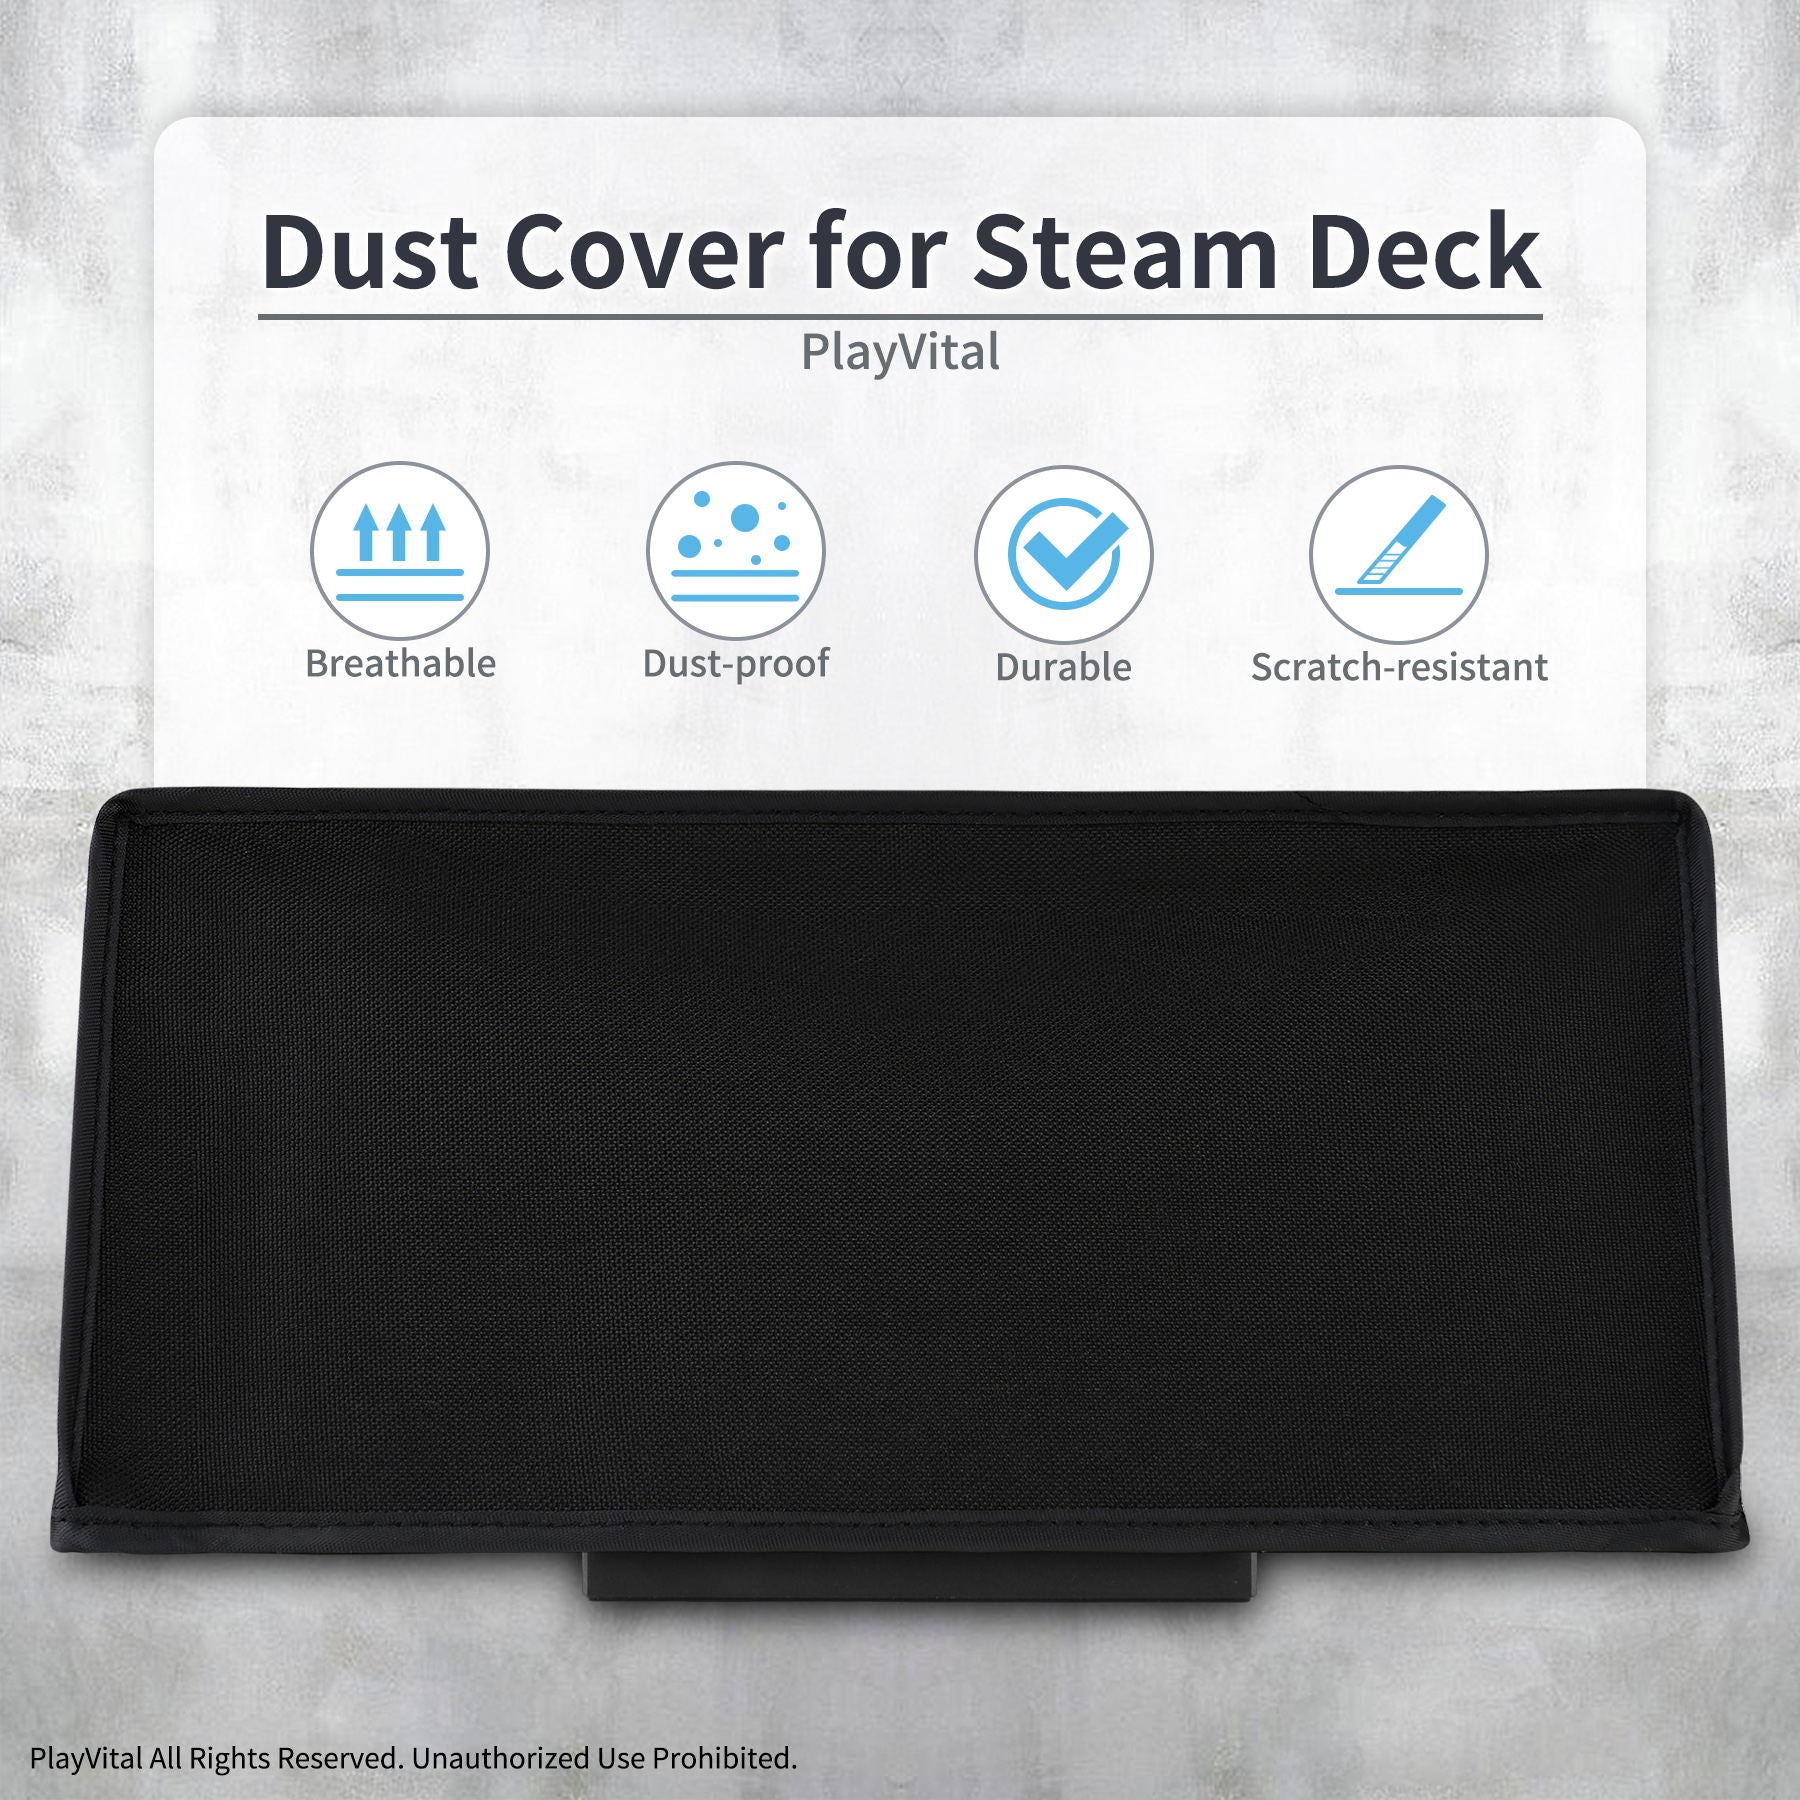 PlayVital Soft Neat Lining Dust Cover for Steam Deck - Black - PCSDM001 PlayVital